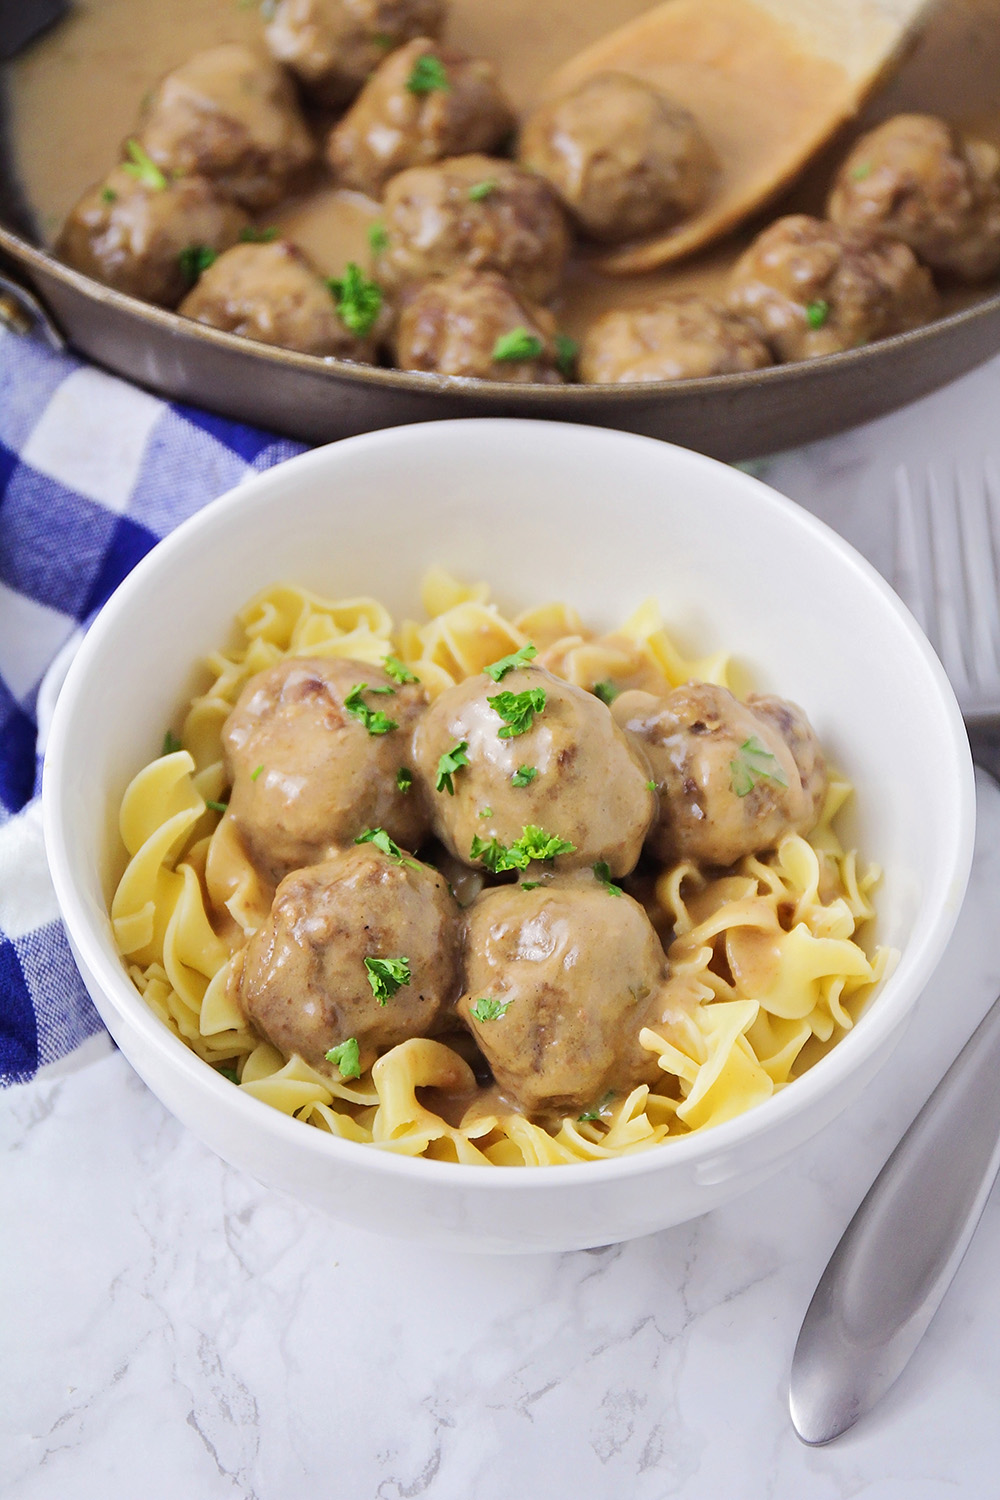 These quick and easy Swedish meatballs are savory and delicious, and so easy to make! They're a comfort food meal in less than 30 minutes! 